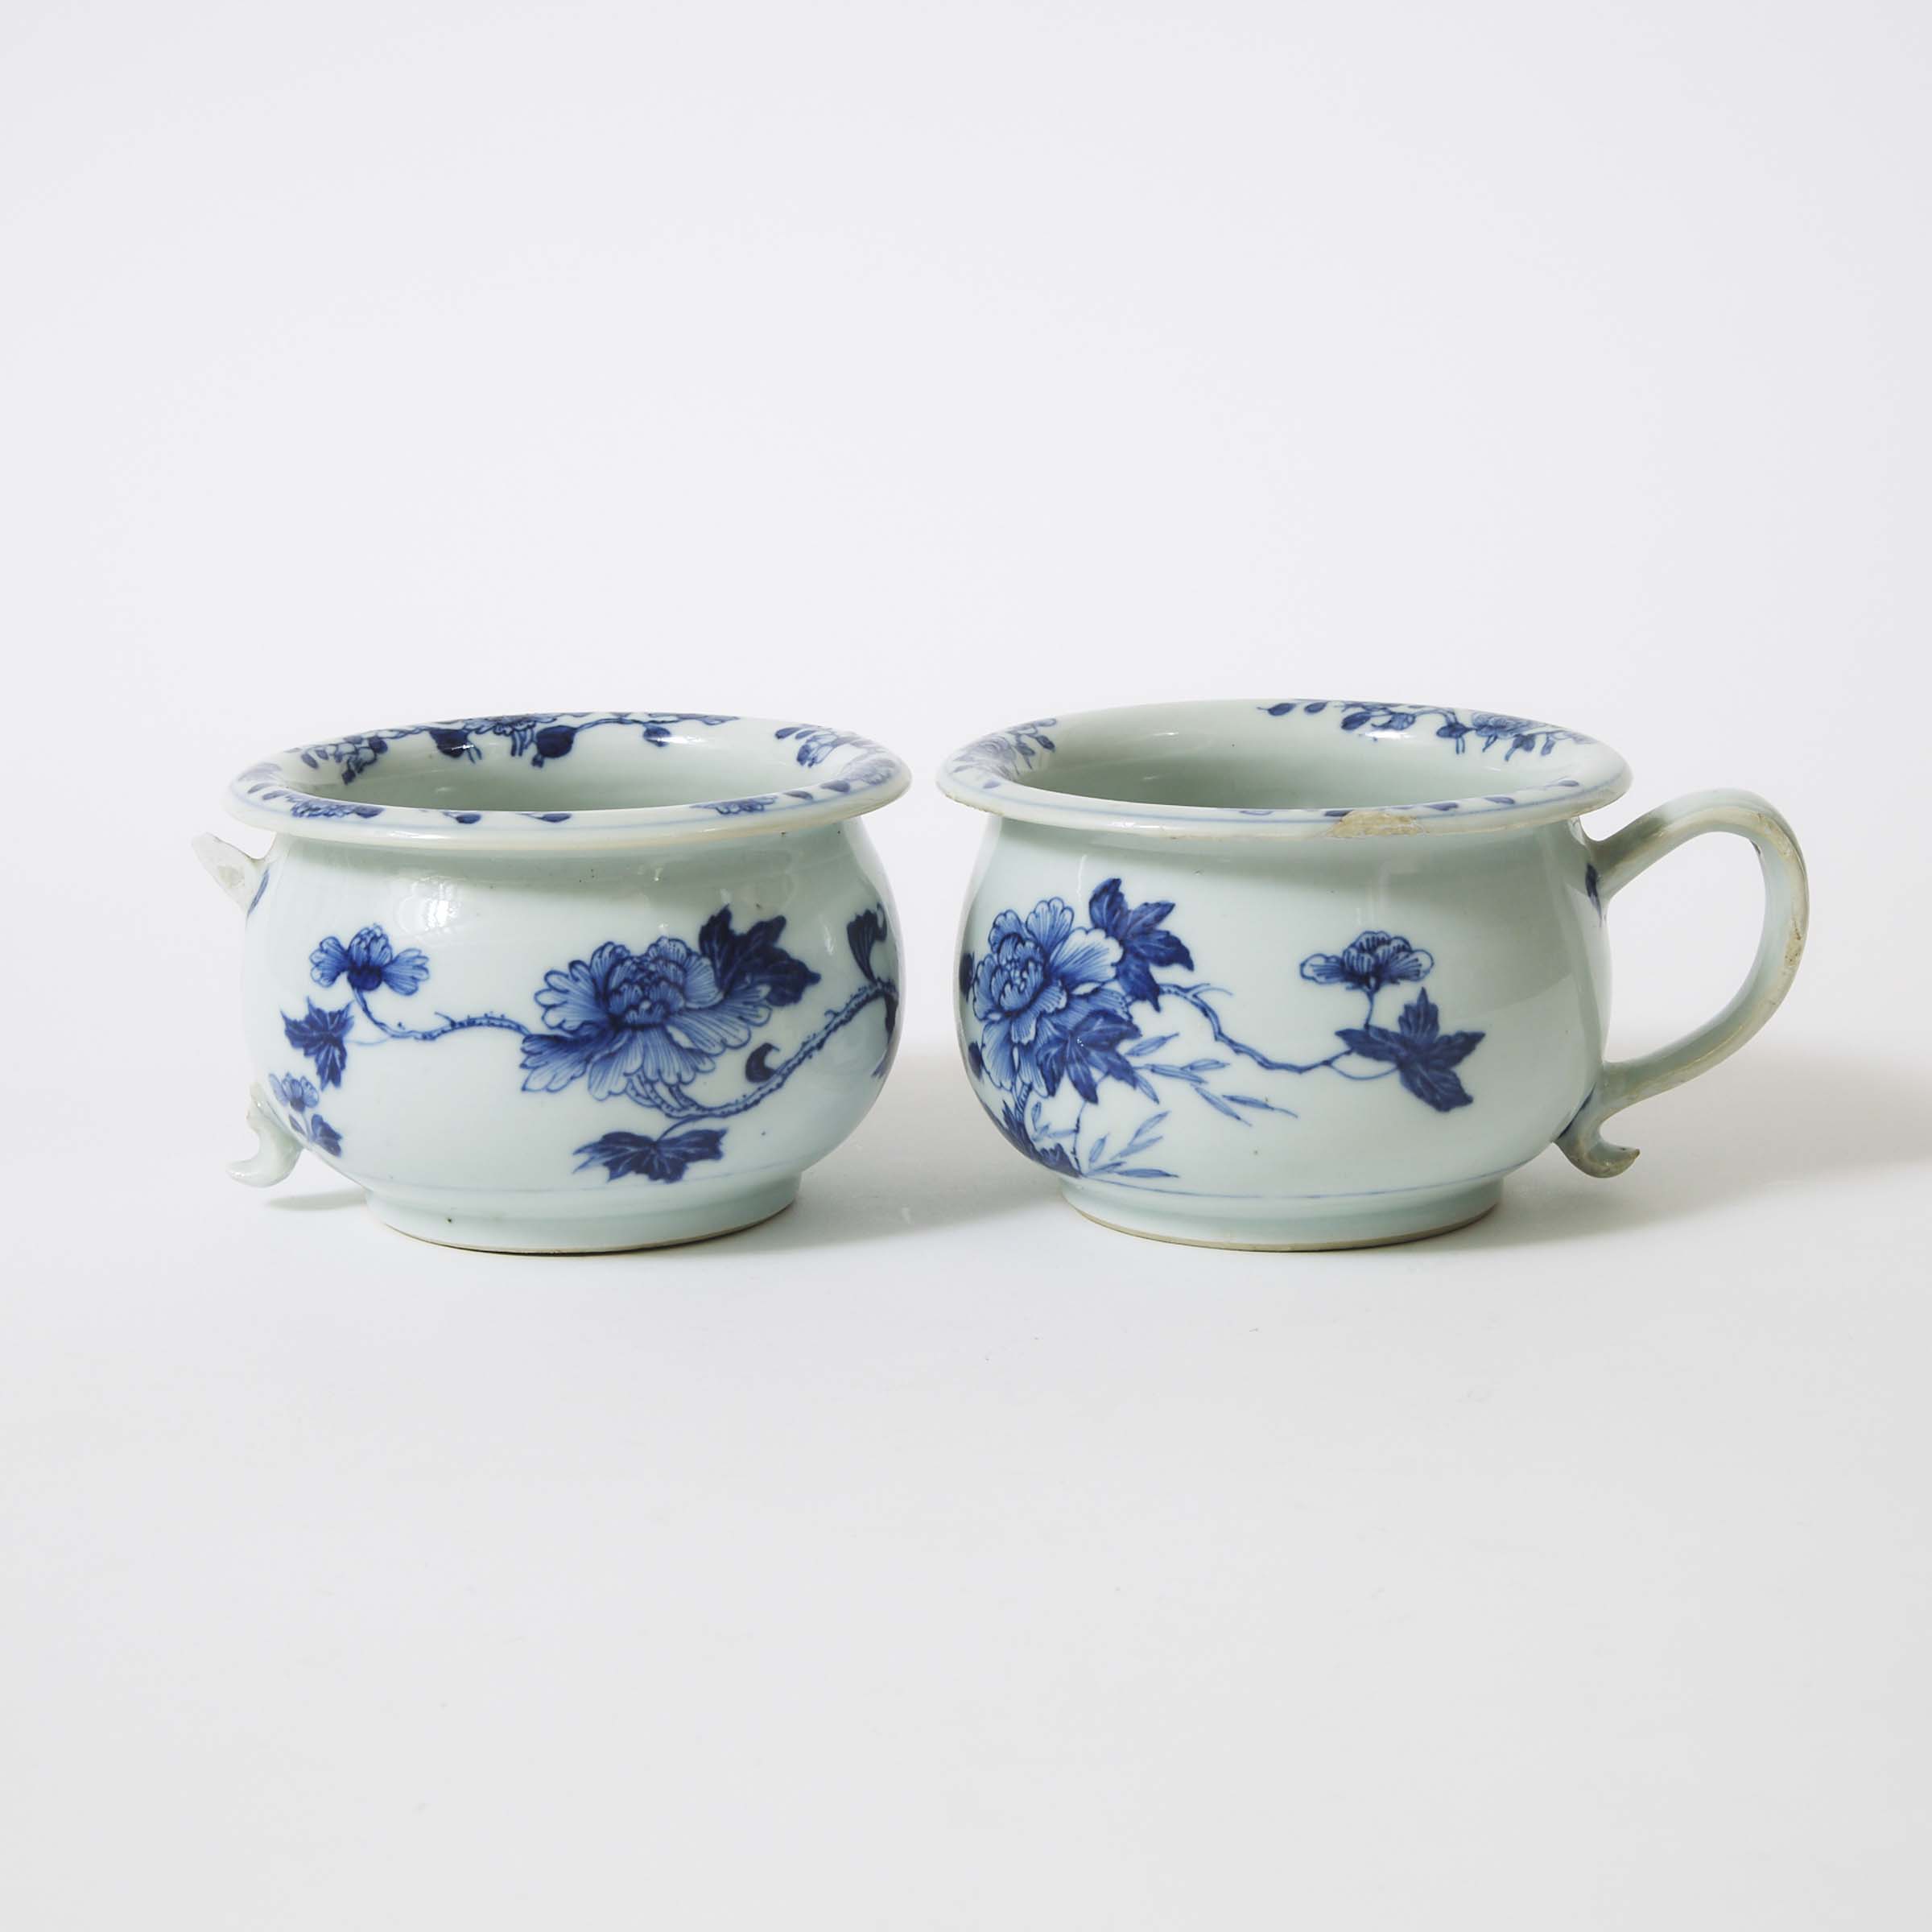 A Pair of Children's Chamber Pots from the Nanking Cargo, Qianlong Period, Circa 1750